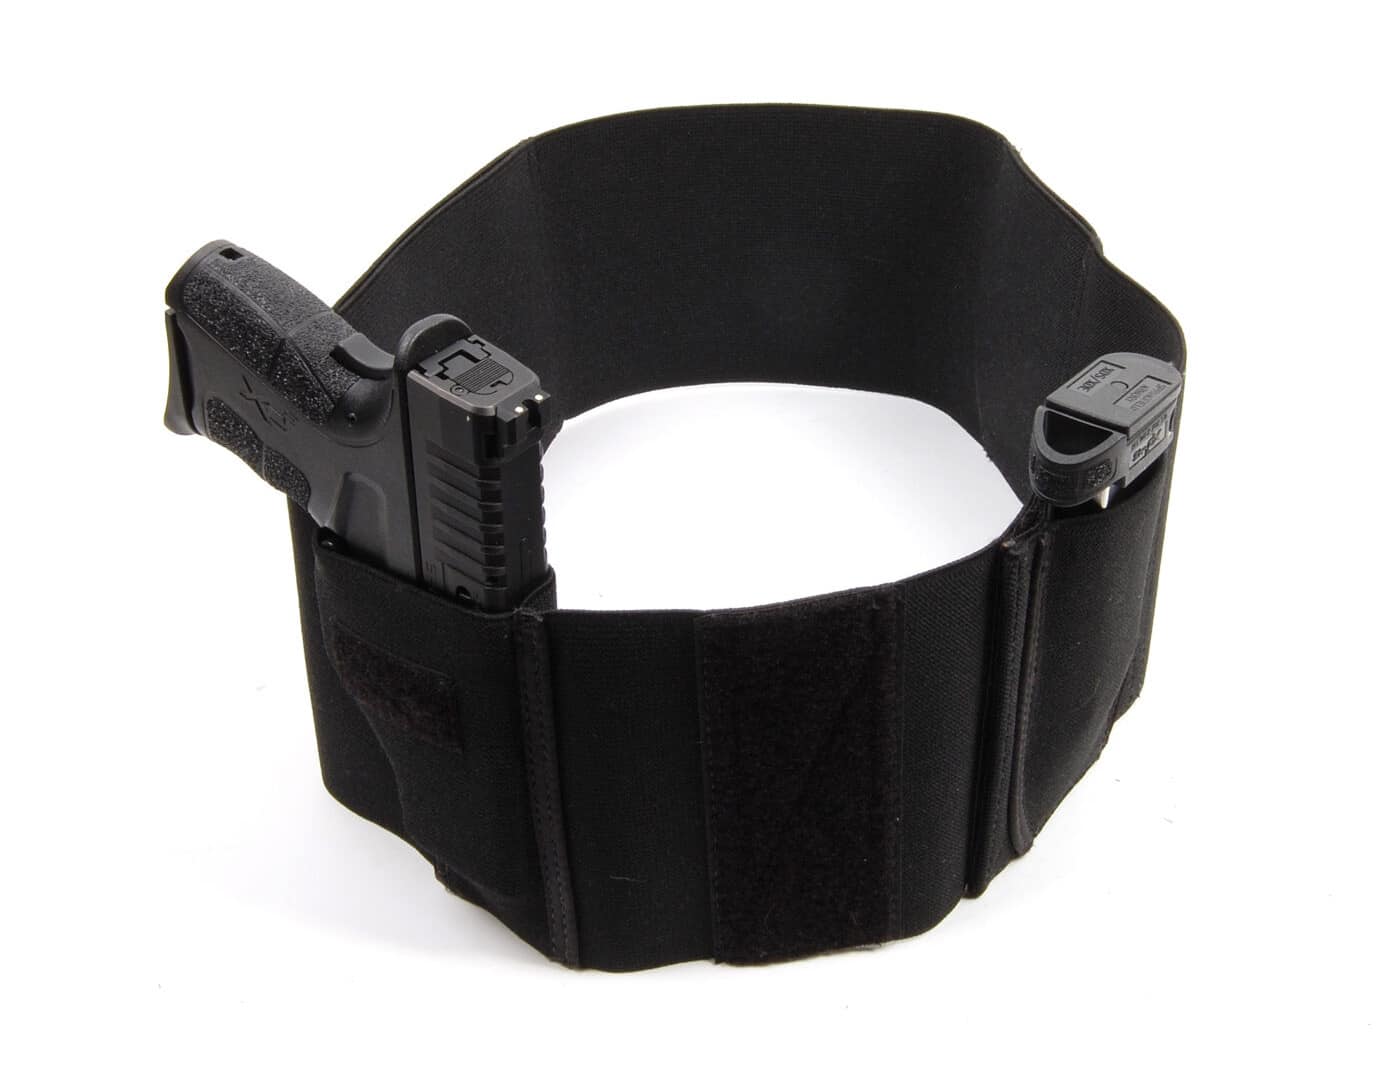 Belly band for concealed carry